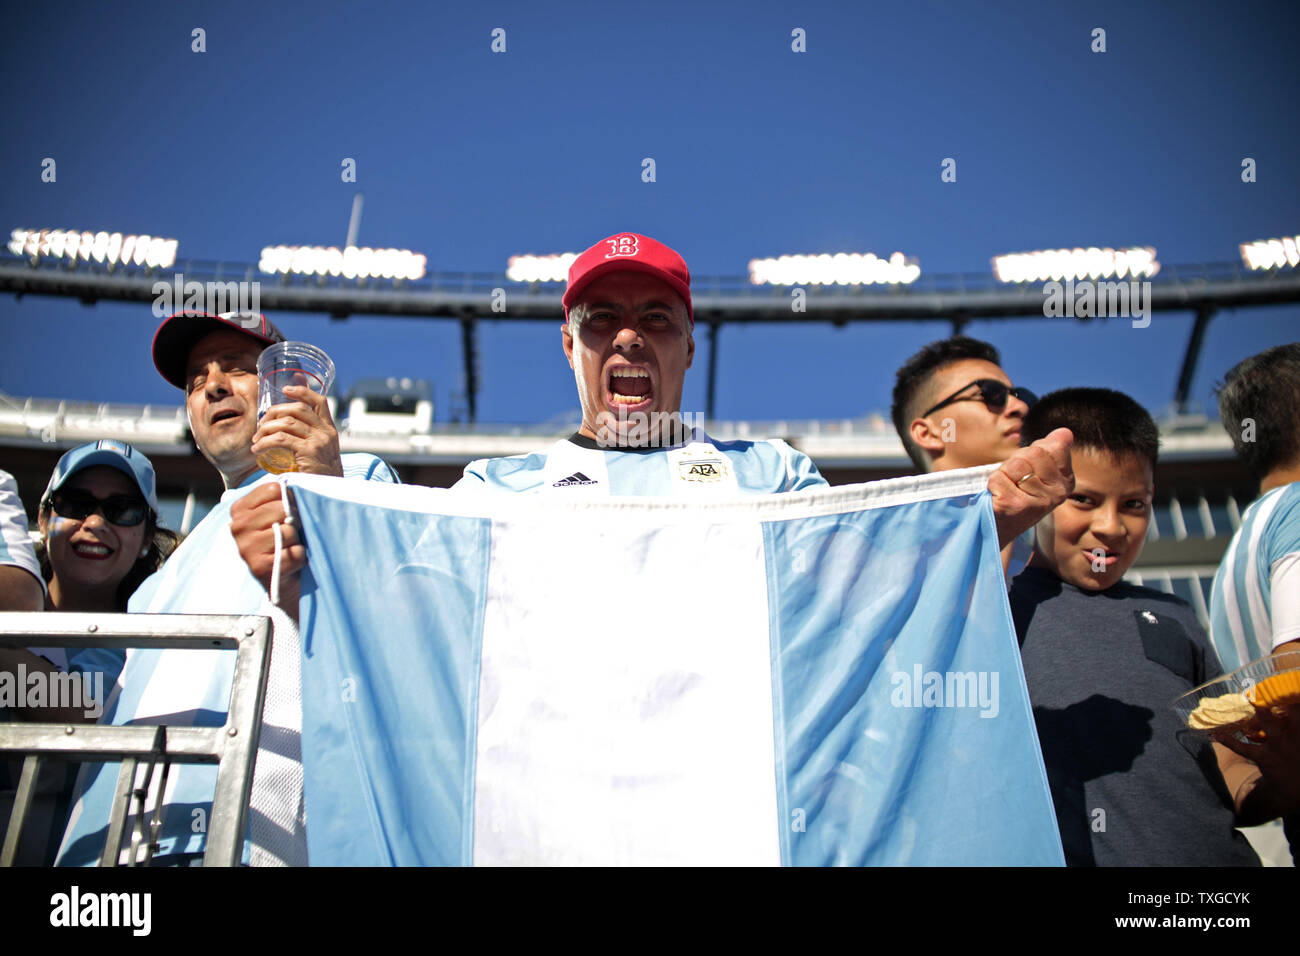 An Argentina fan yells at the camera prior to the 2016 Copa America Centenario quarterfinal match between Argentina and Venezuela at Gillette Stadium in Foxborough, Massachusetts on June 18, 2016.  Photo by Matthew Healey/UPI Stock Photo